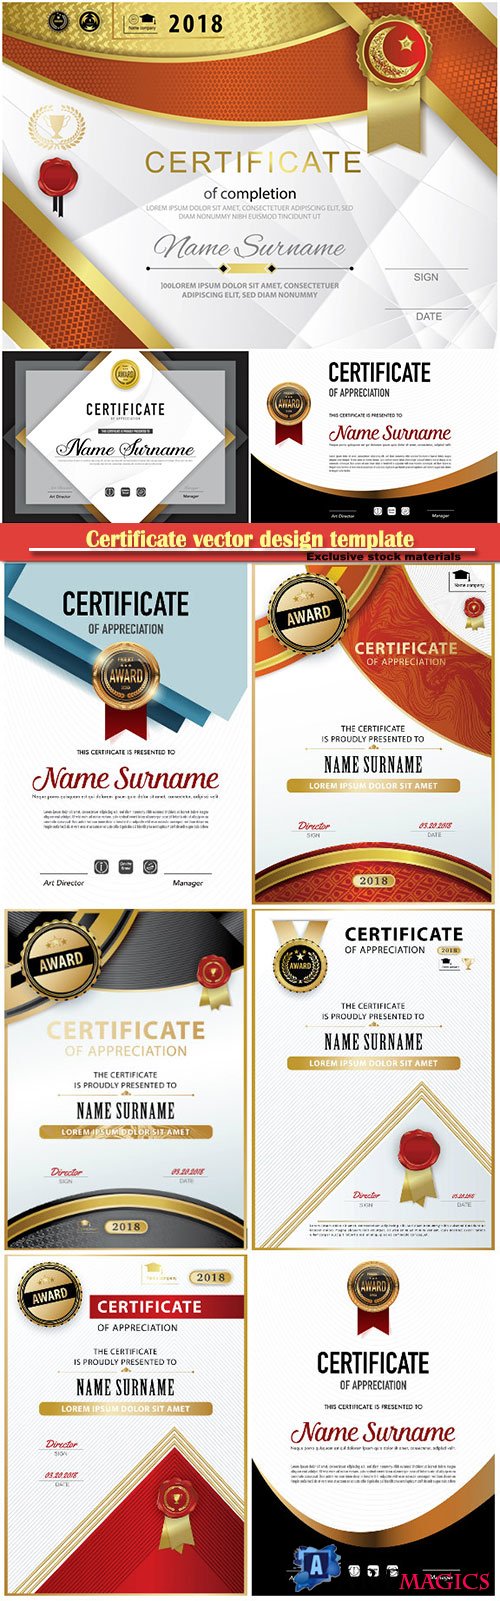 Certificate and vector diploma design template # 69